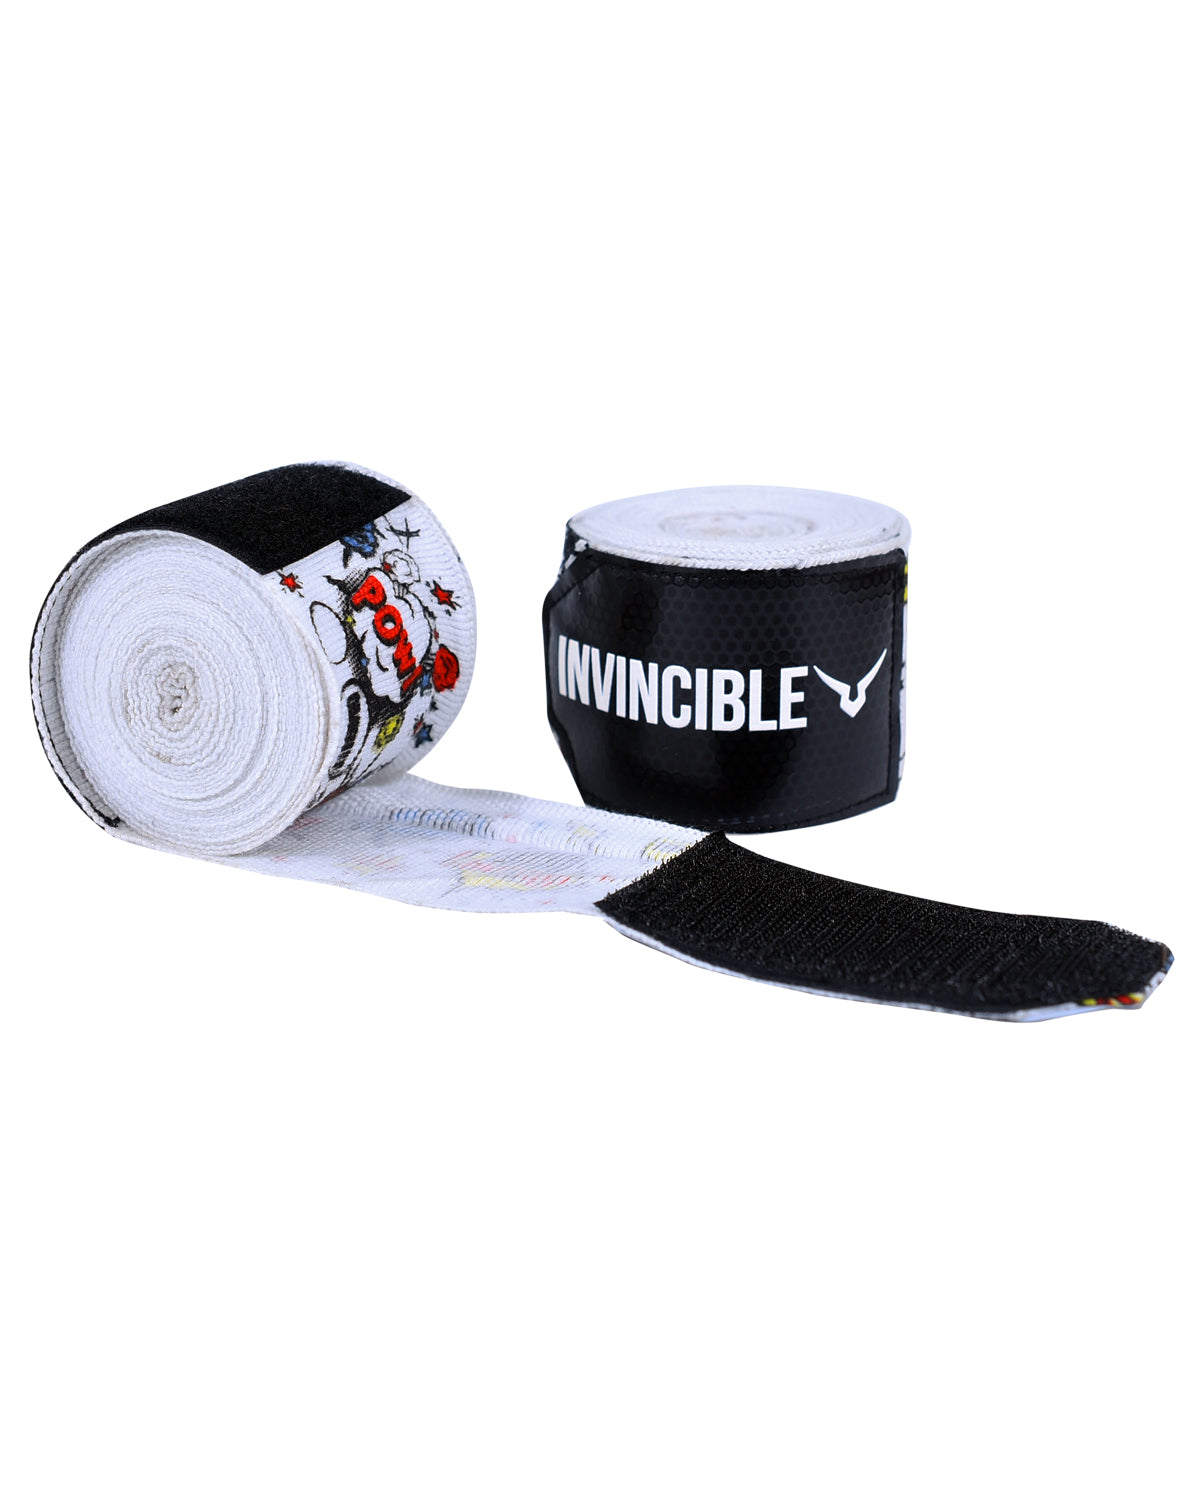 Invincible Printed Hand Wraps